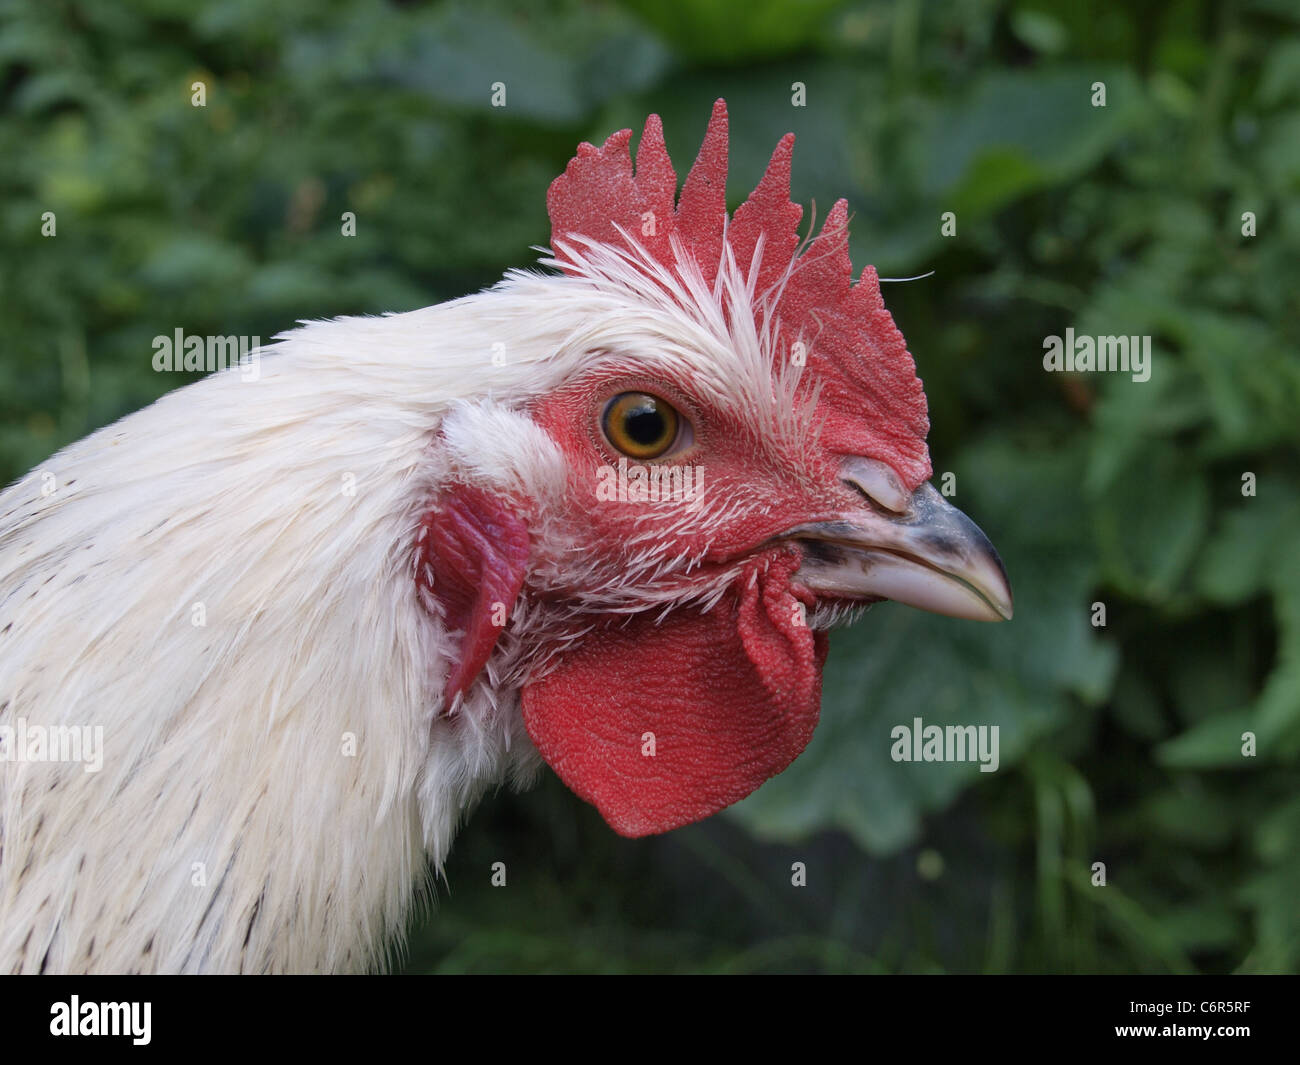 Young Light Sussex Cockerel. Close up of head Stock Photo